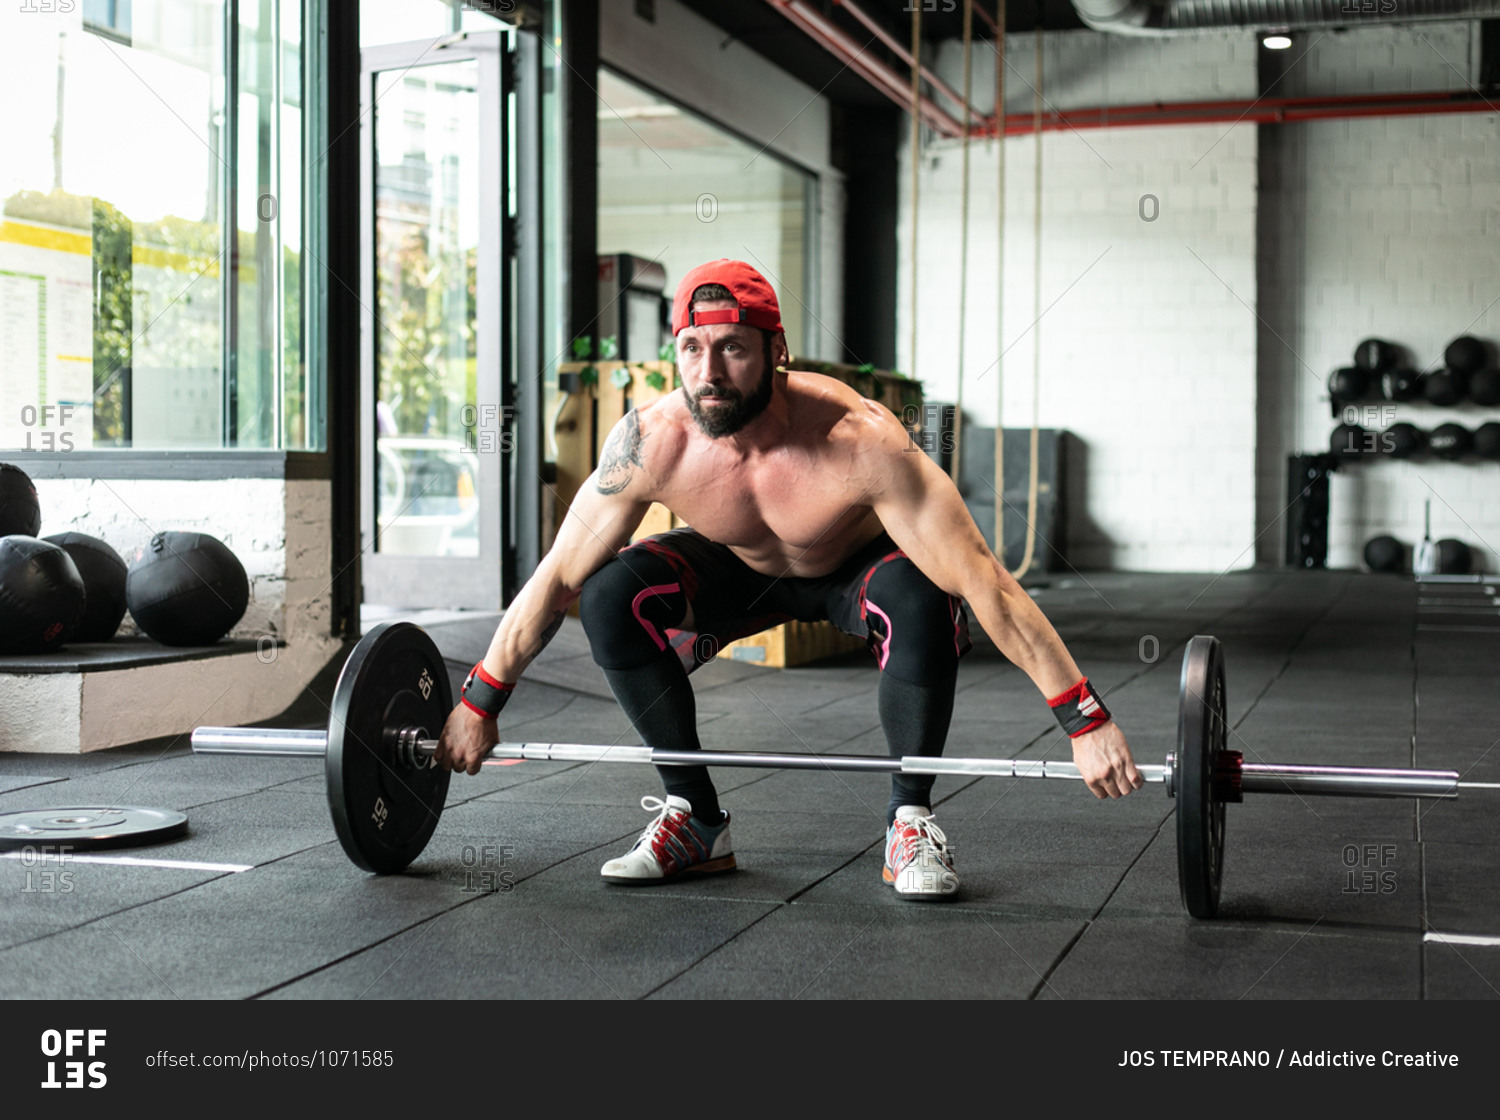 Muscular focused shirtless male athlete doing clean and jerk exercise with barbell during weightlifting training in gym looking away